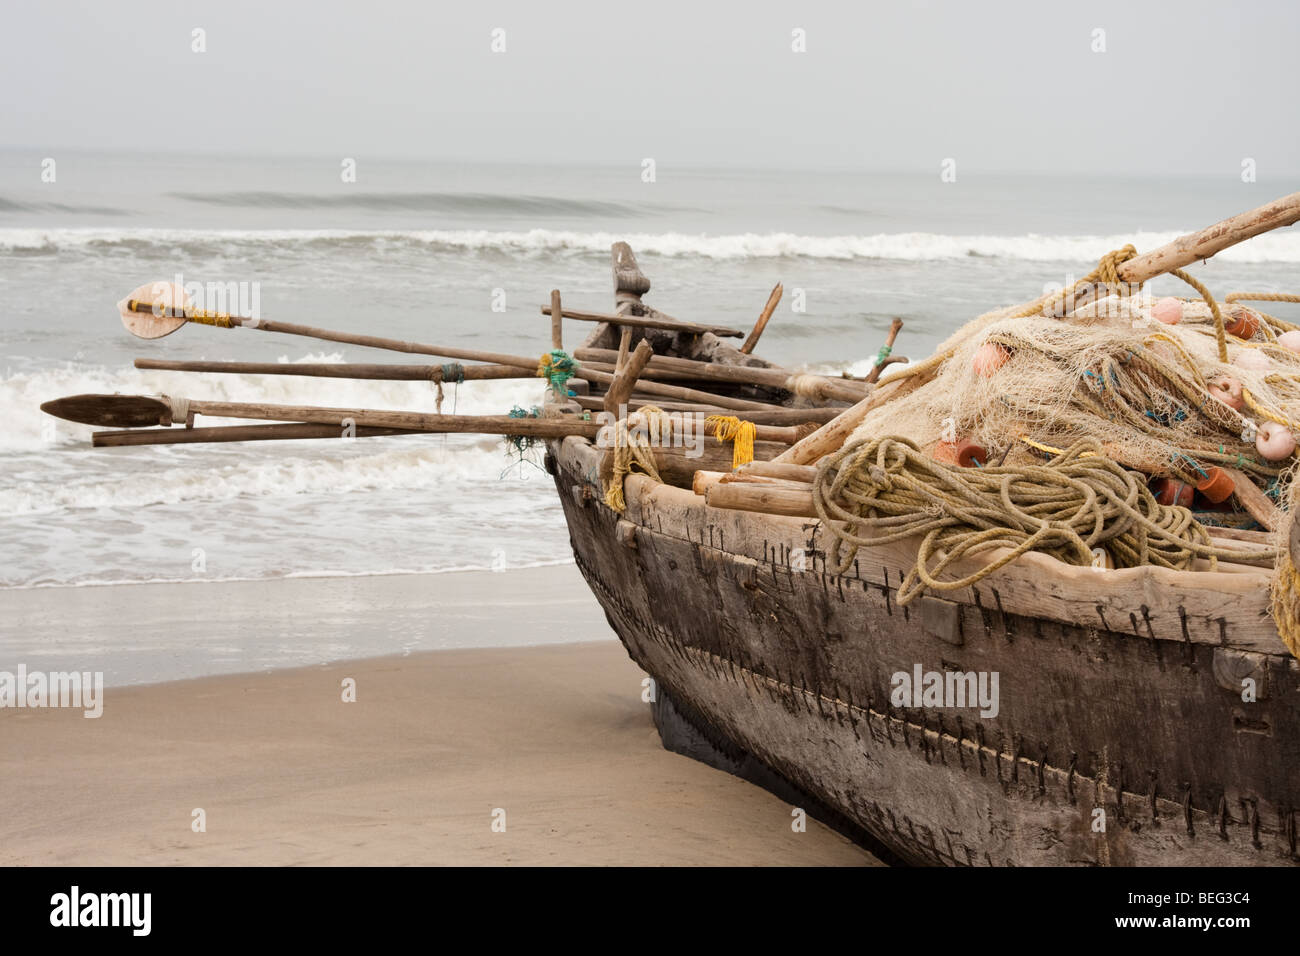 Fisherman boat full with gear at the beach Stock Photo